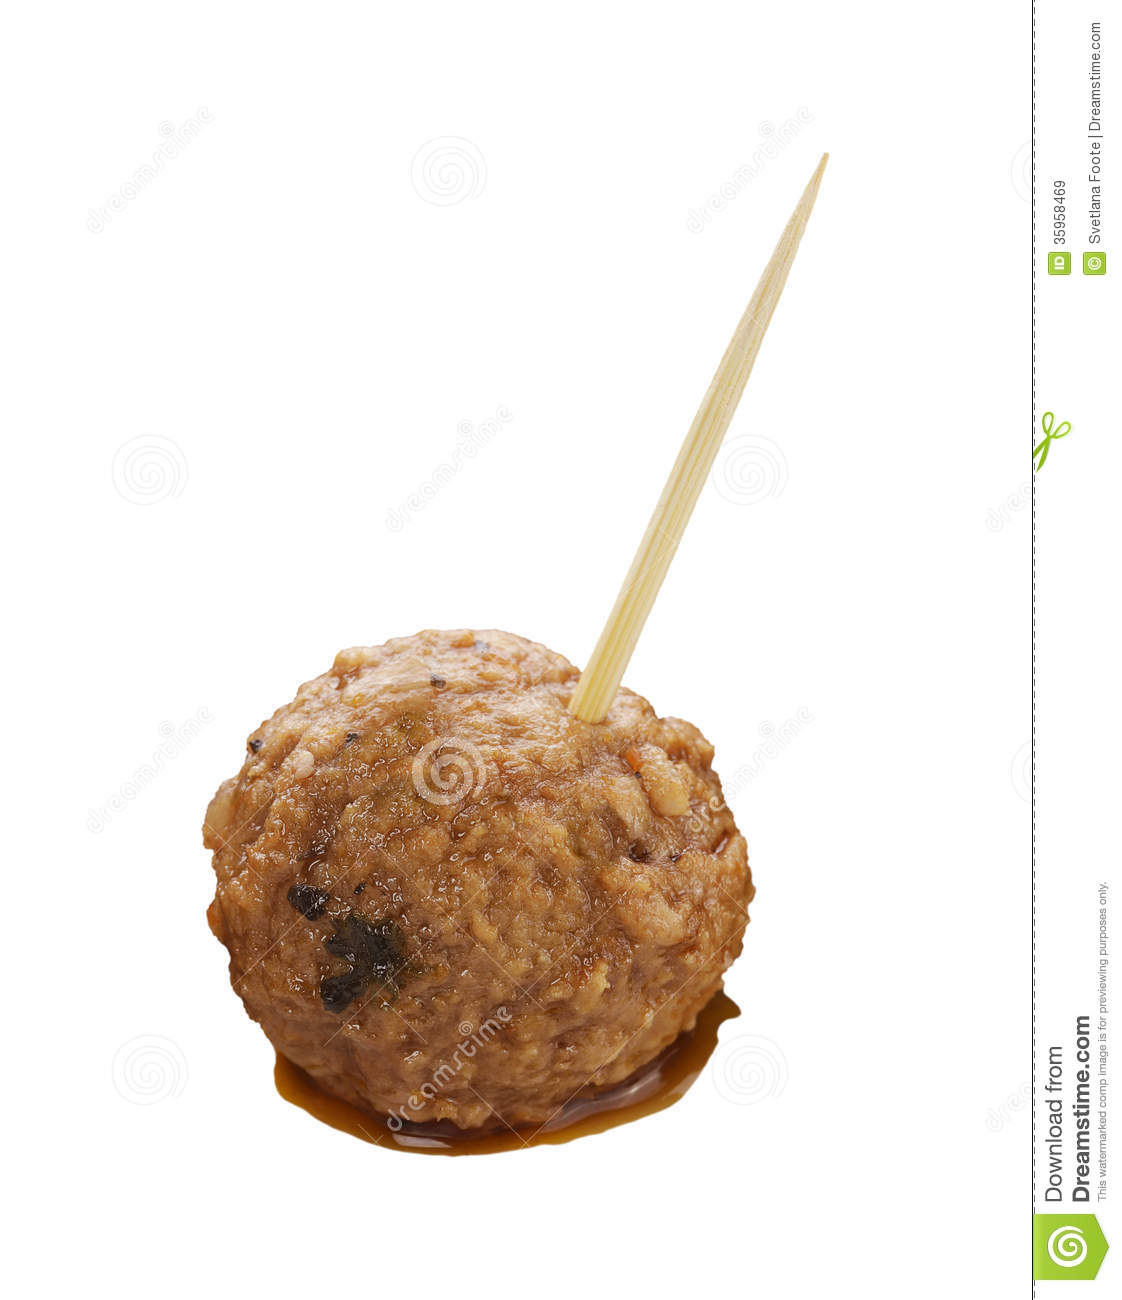 Meatball Royalty Free Stock Images   Image  35958469